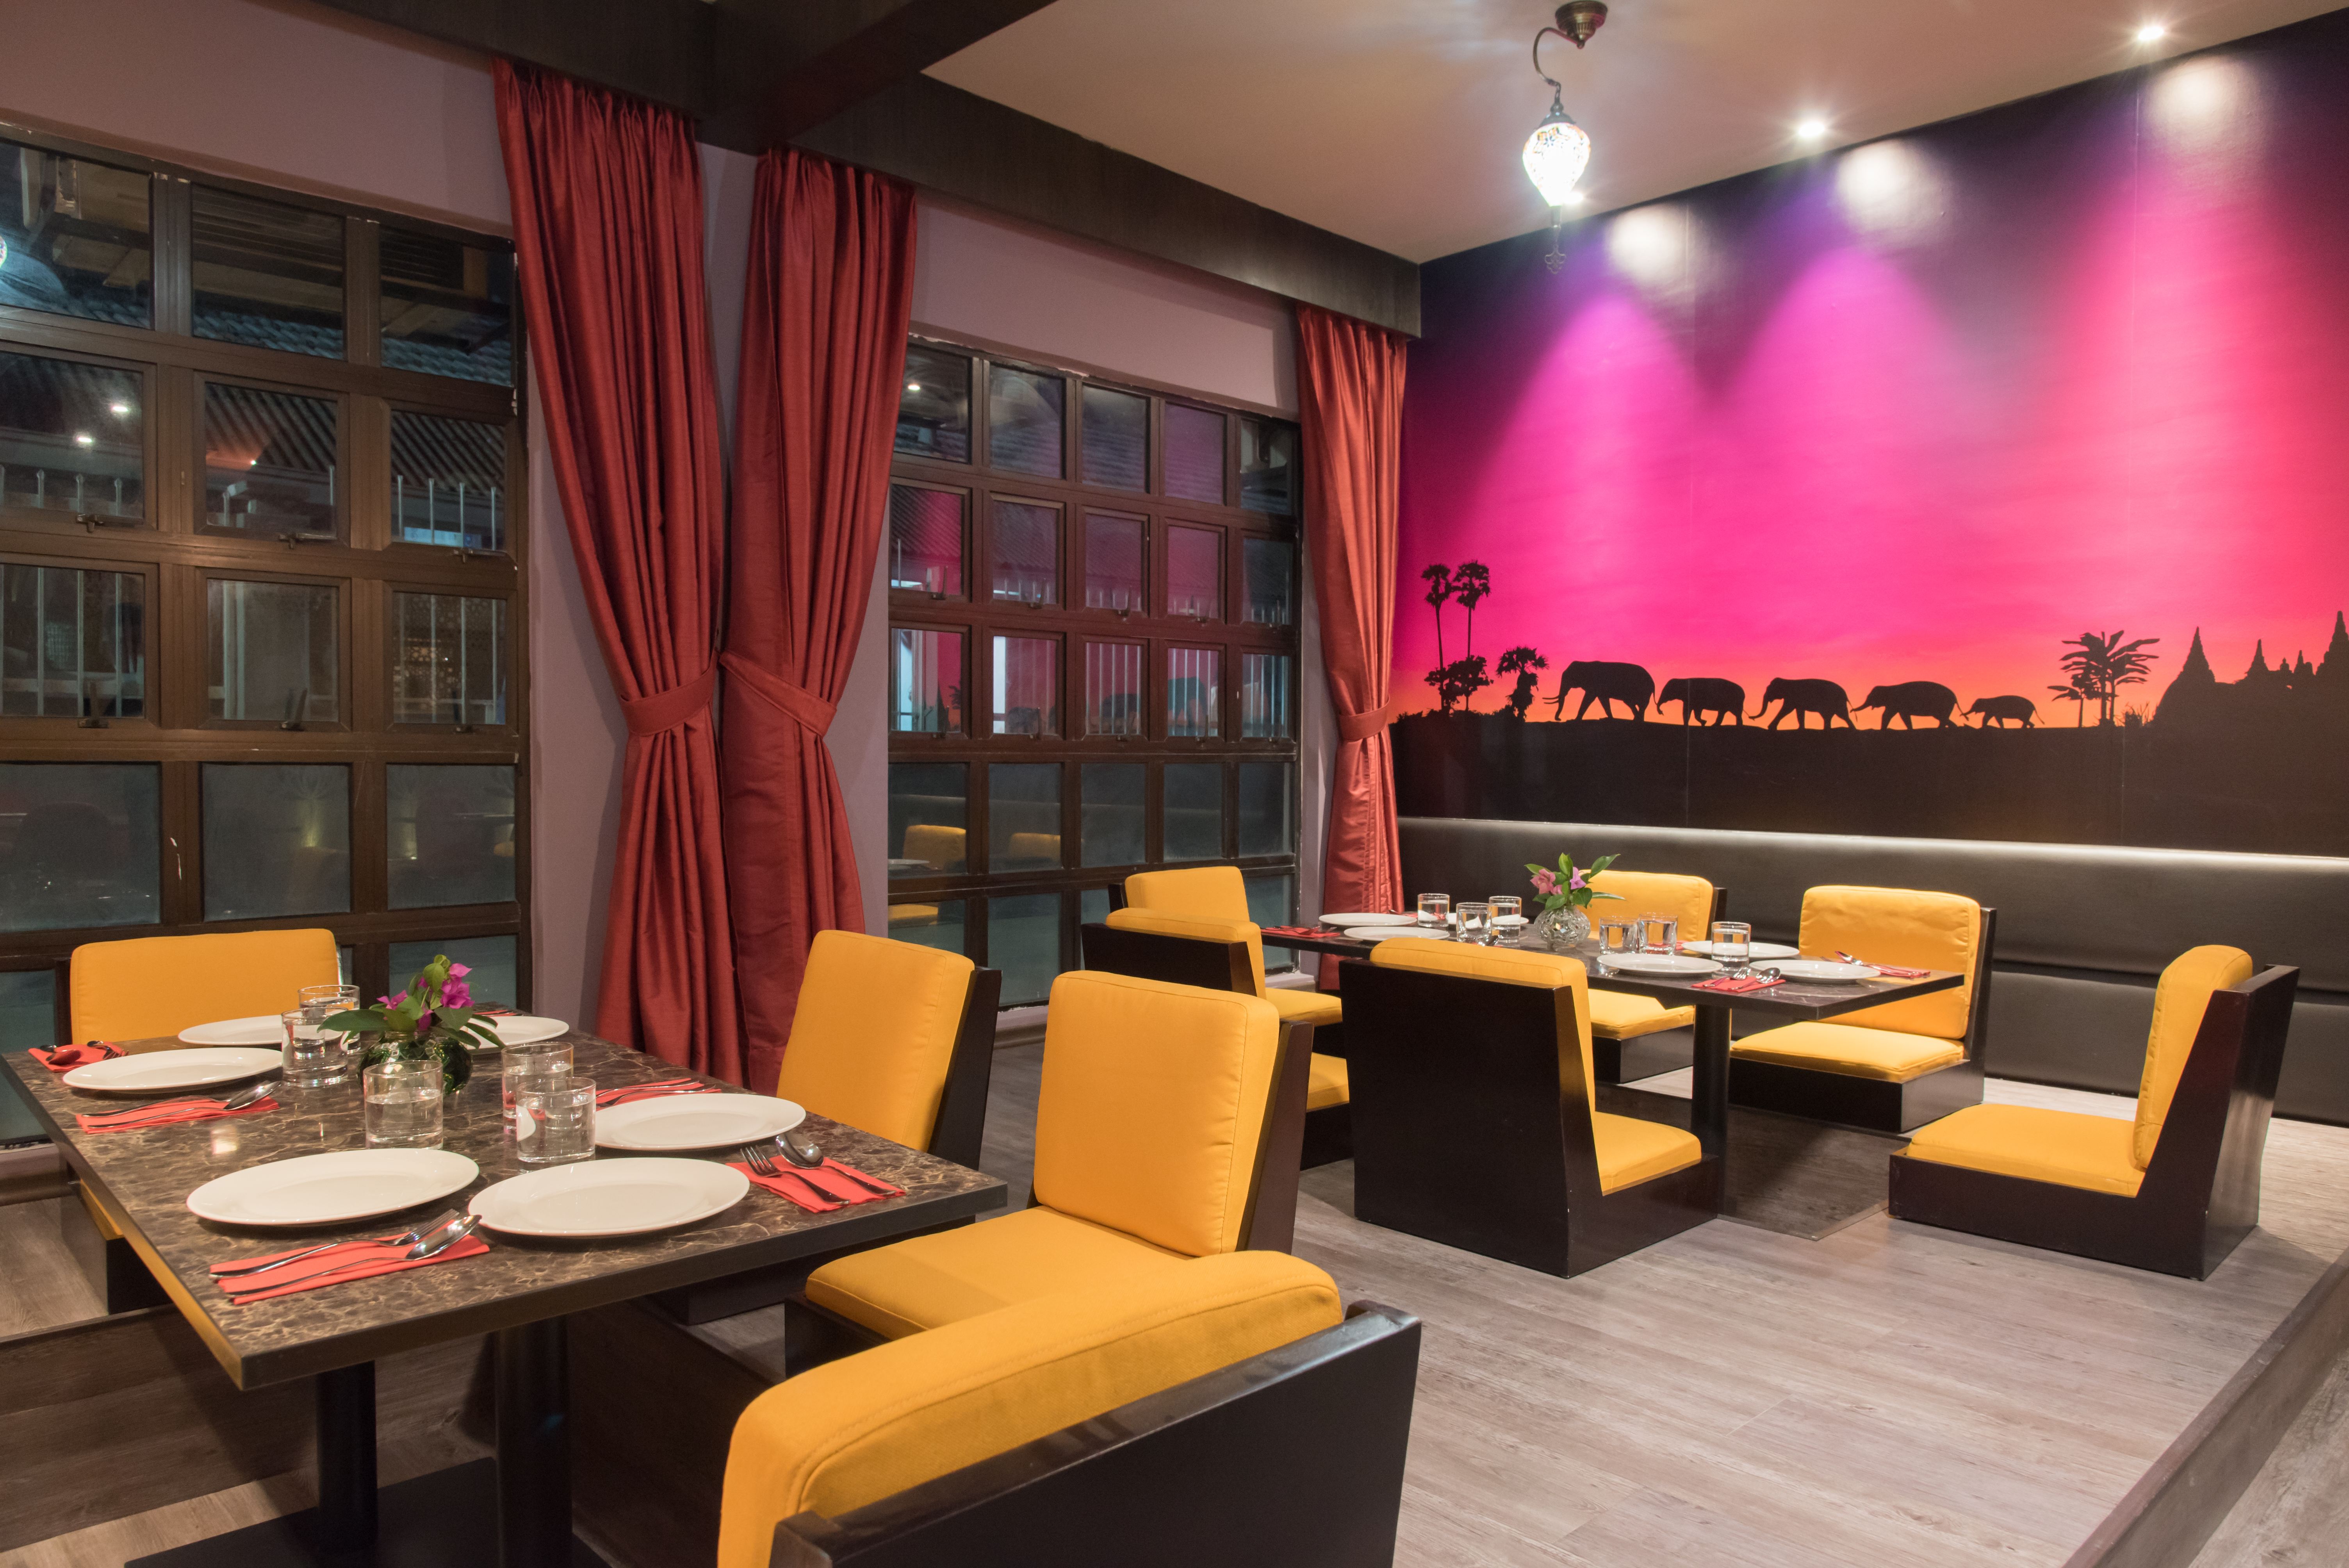 7 Incredible Reasons To Book Restaurants With Banquet Rooms